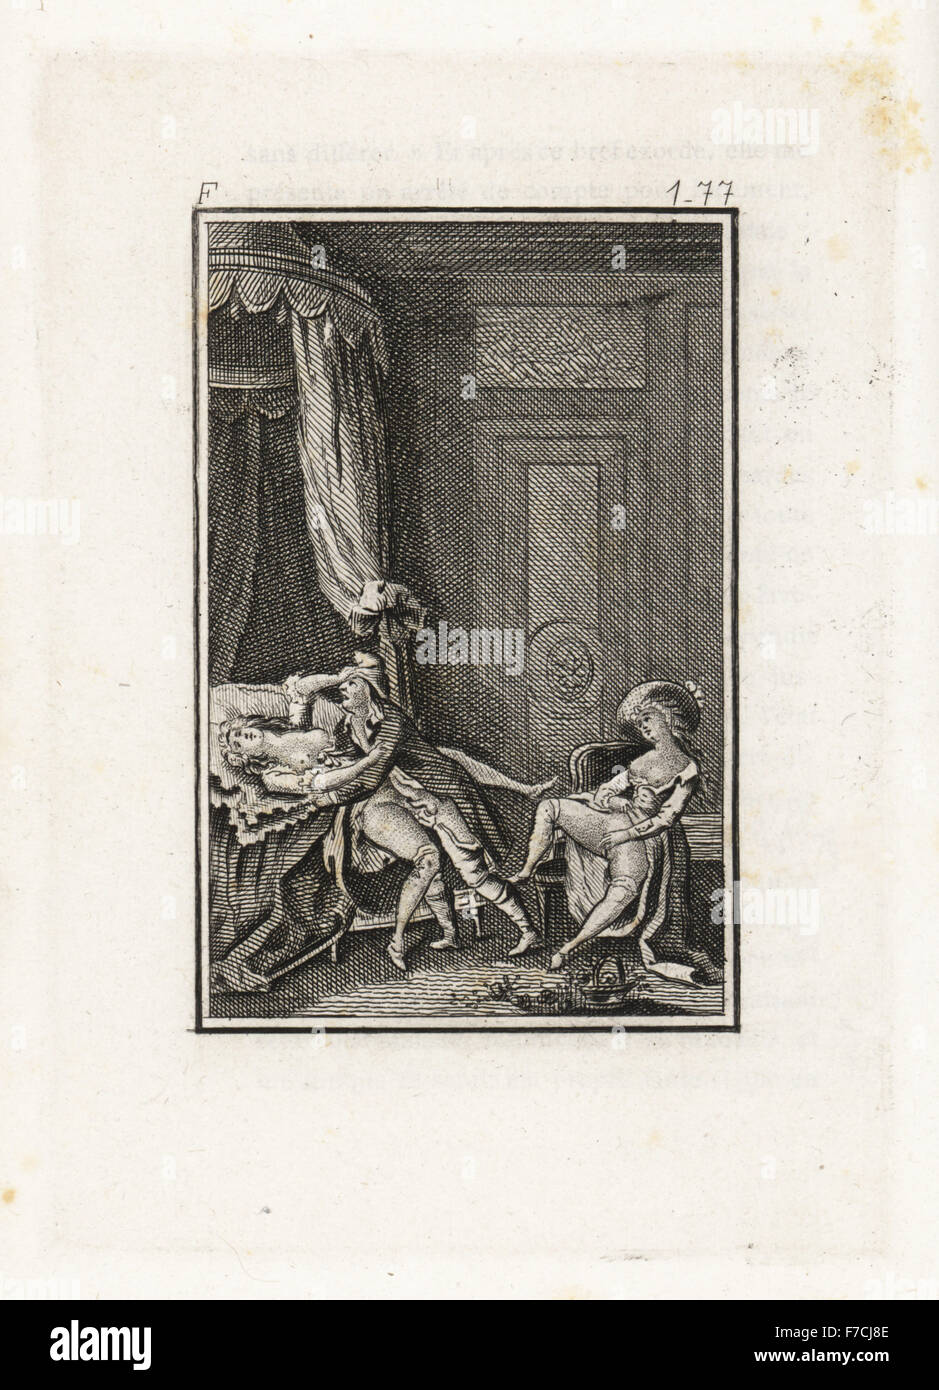 Erotic scene in a bedroom with gentleman having sex with a woman on a bed while another lady watches, 18th century